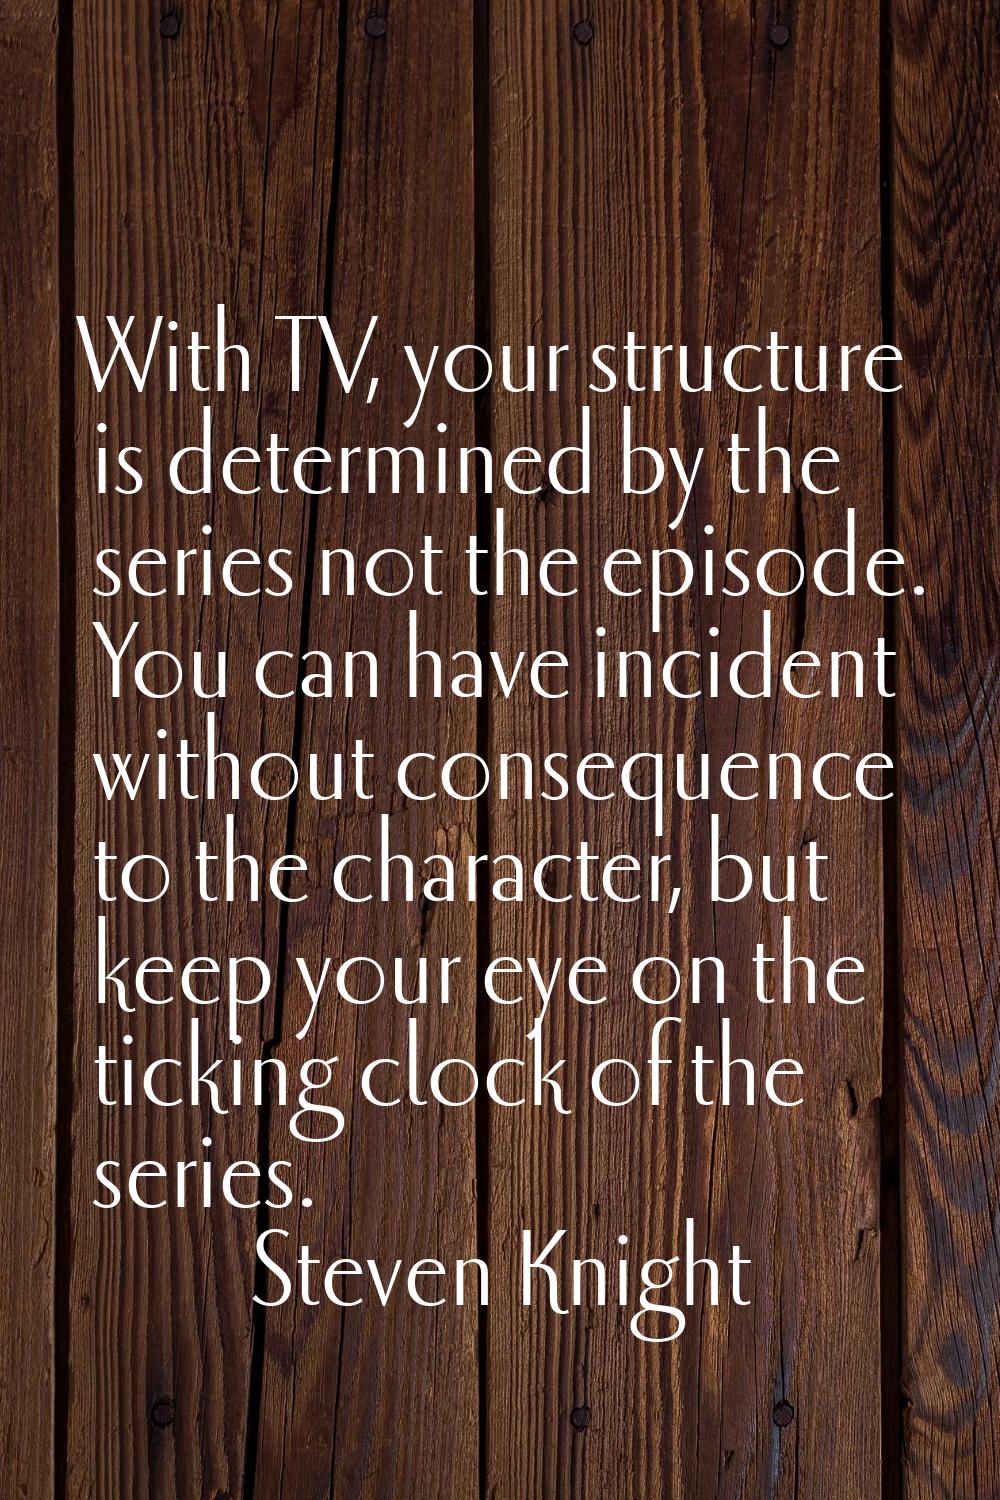 With TV, your structure is determined by the series not the episode. You can have incident without 